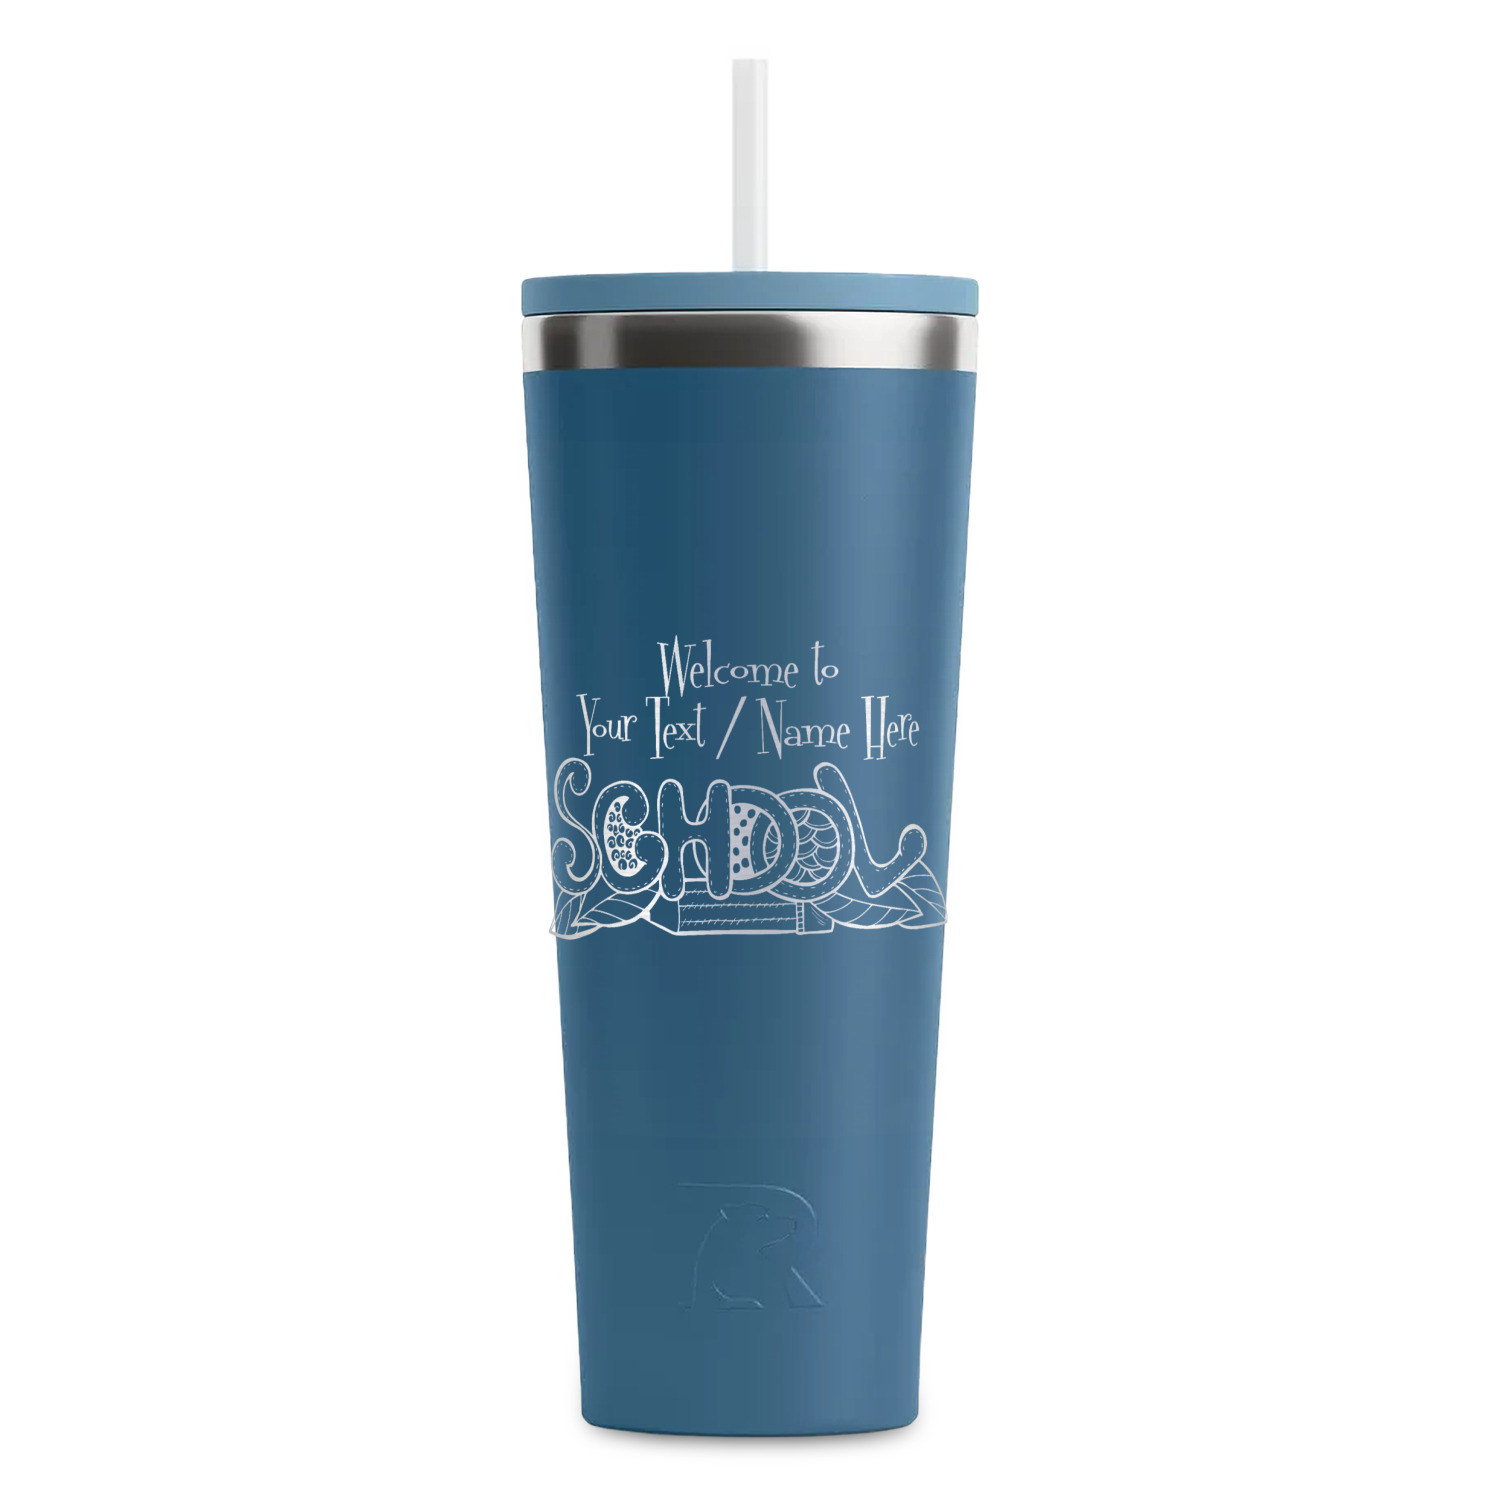 https://www.youcustomizeit.com/common/MAKE/2463811/Welcome-to-School-Steel-Blue-RTIC-Everyday-Tumbler-28-oz-Front.jpg?lm=1698263059